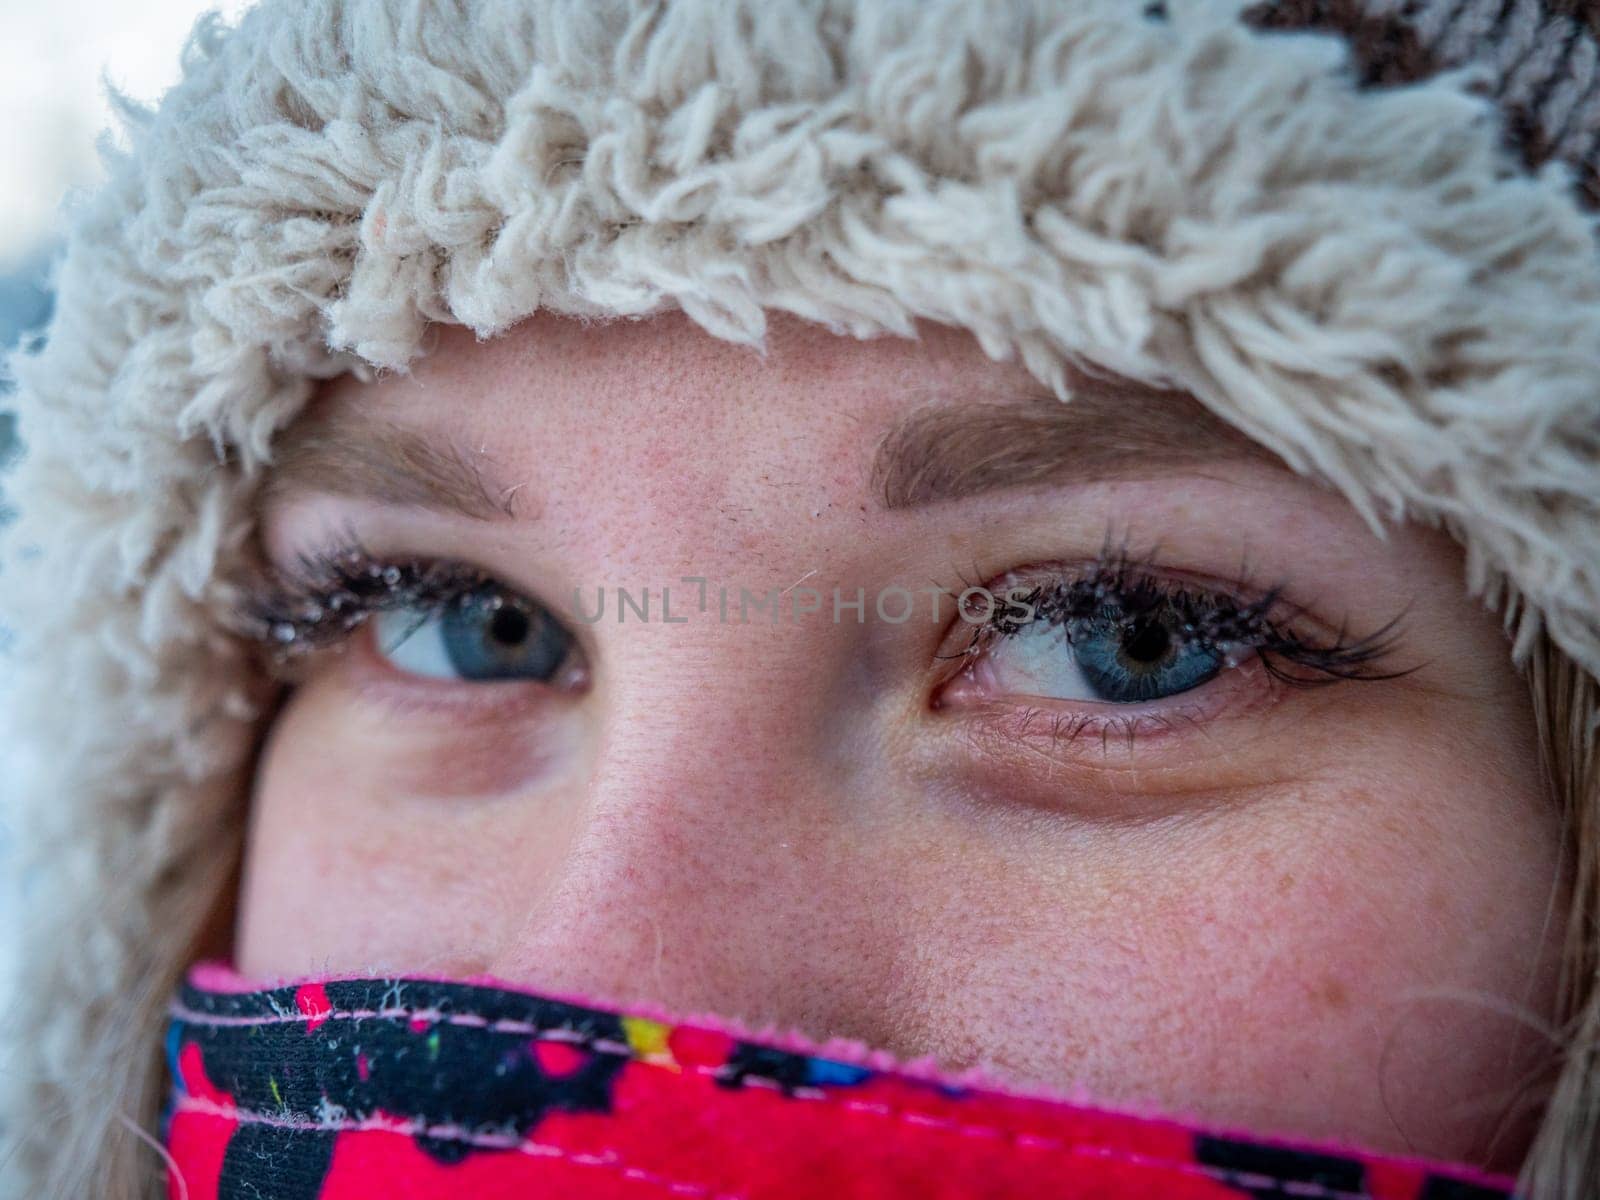 A close-up of a young womans face, showing her blue eyes and winter attire. She is bundled in a colorful scarf and a cozy knit hat, prepared for cold weather.